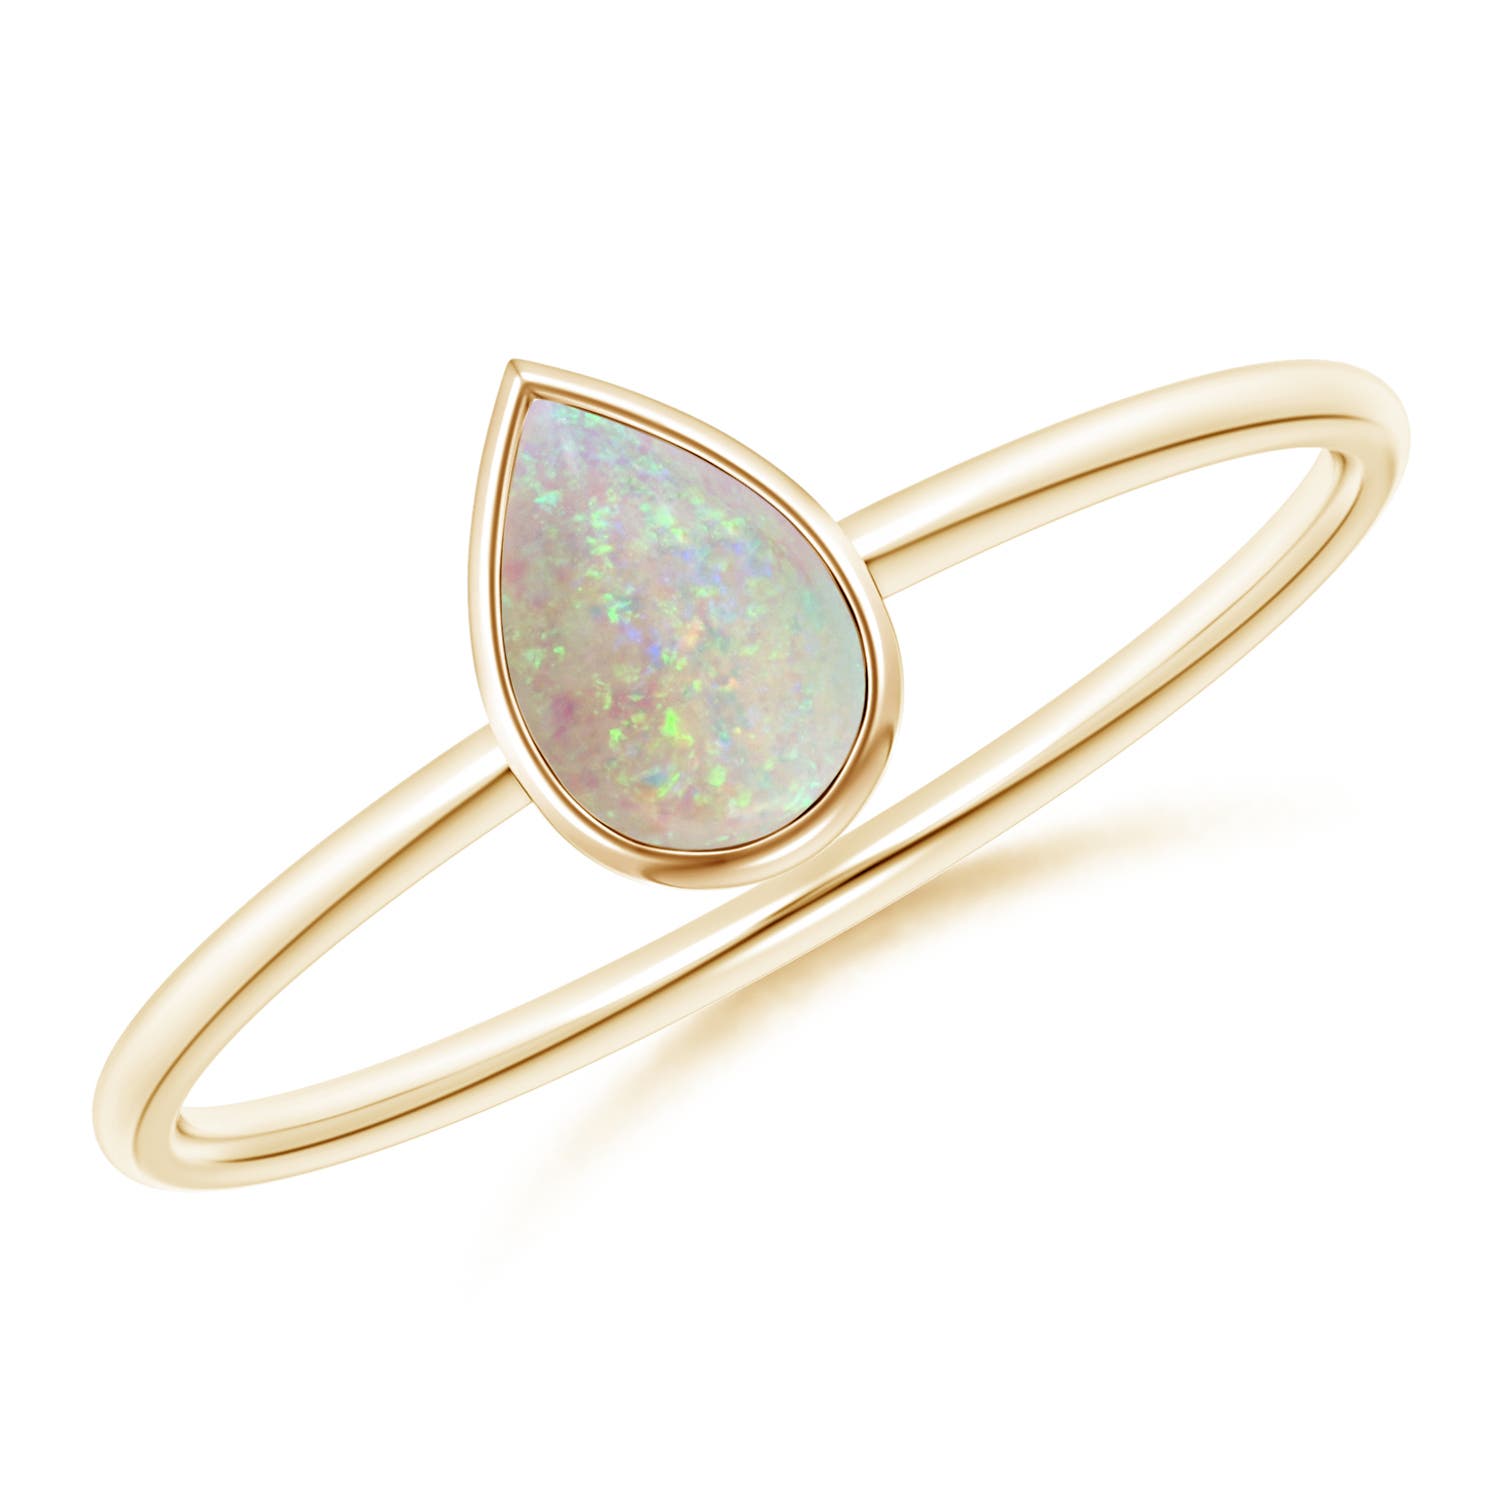 AAA - Opal / 0.26 CT / 14 KT Yellow Gold